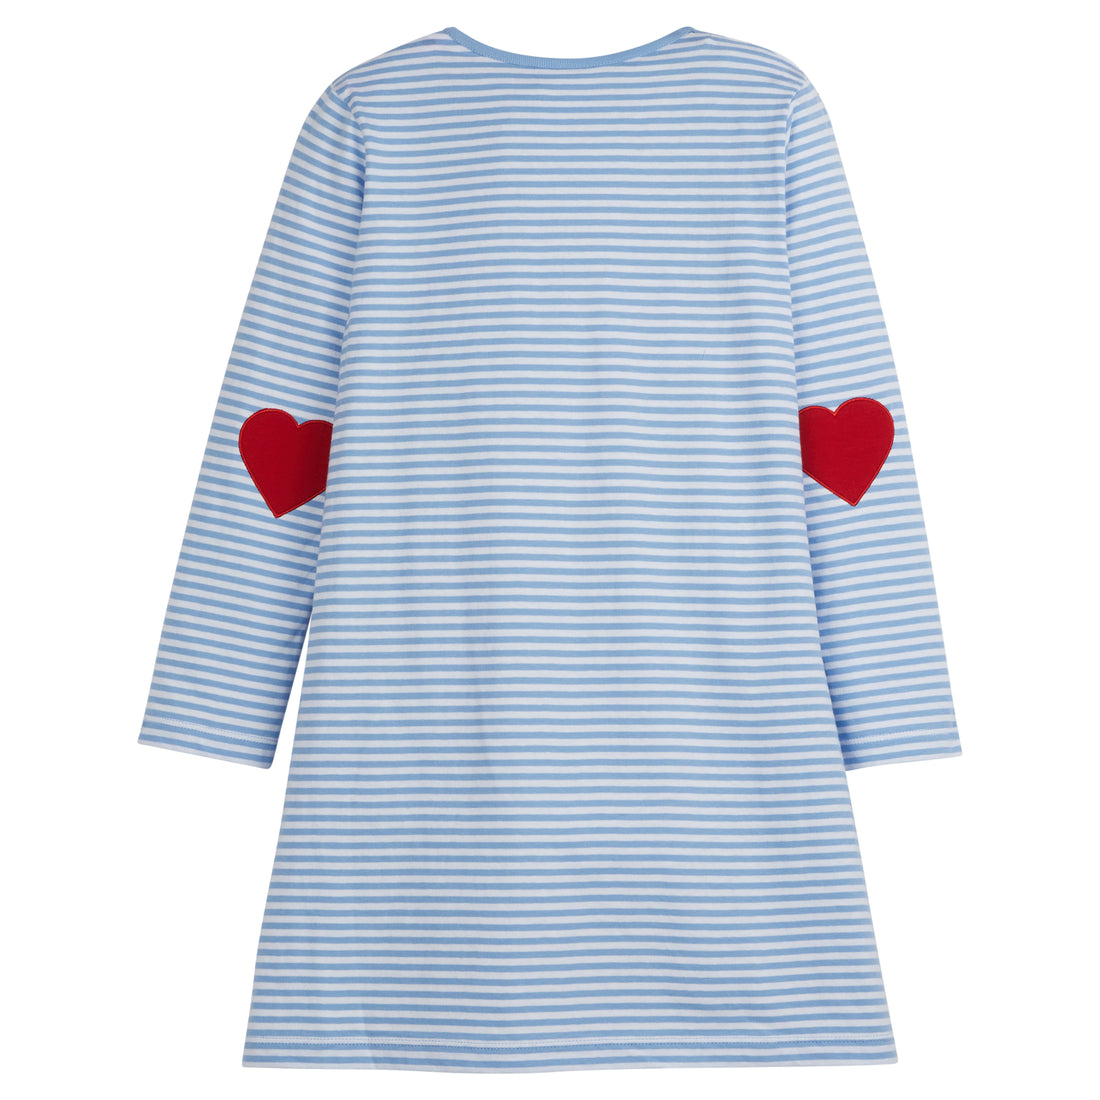 Little English light blue and white striped t-shirt dress with pockets and applique hearts, girl&